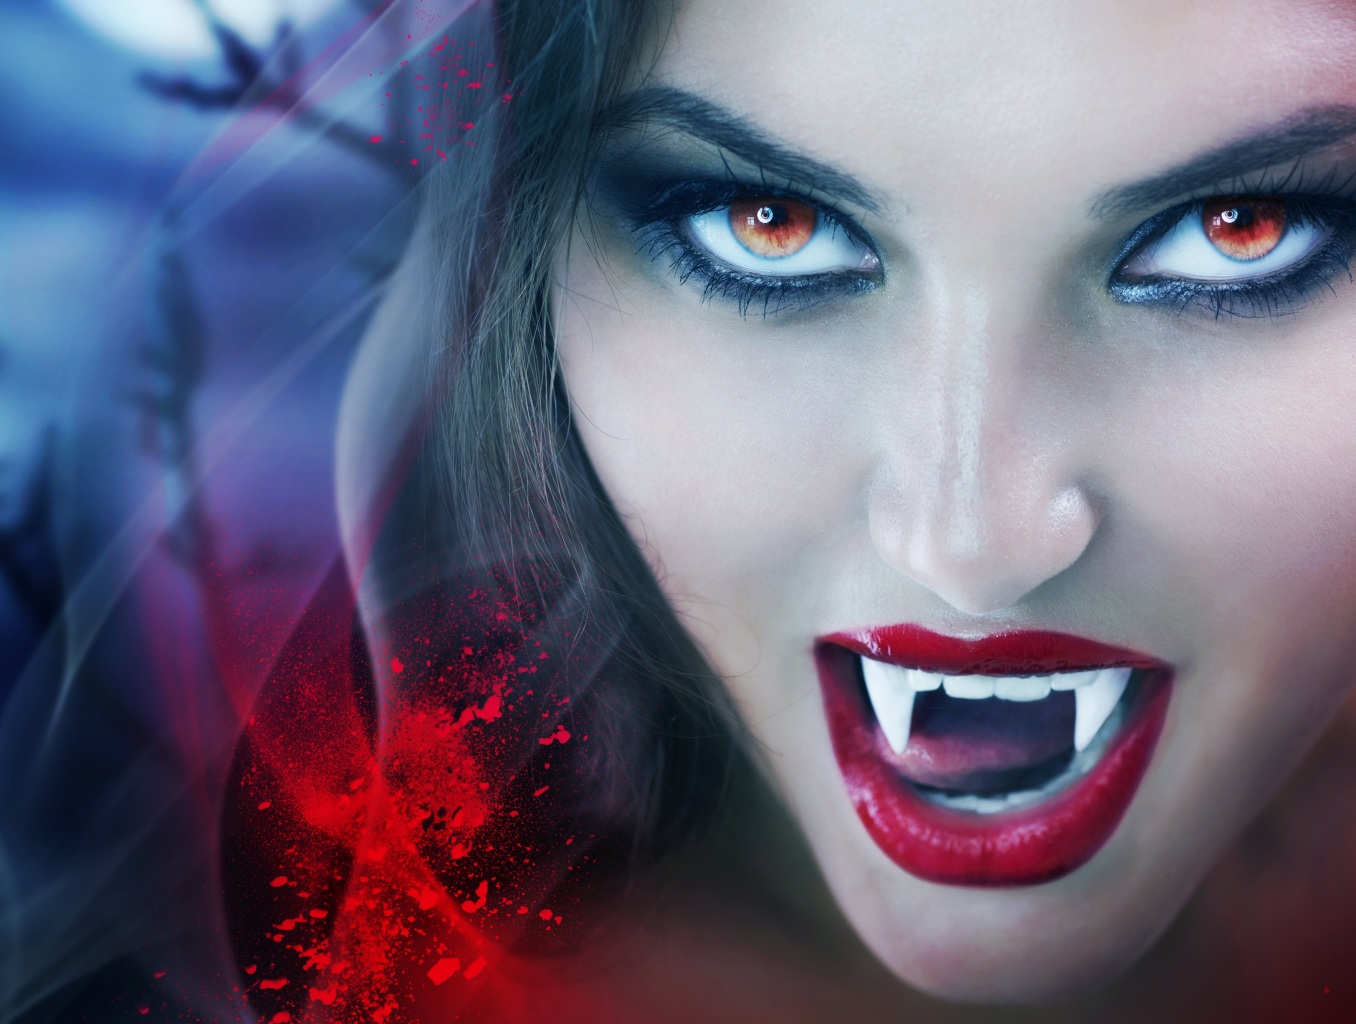 Vampires got it right, say scientists studying youthful blood